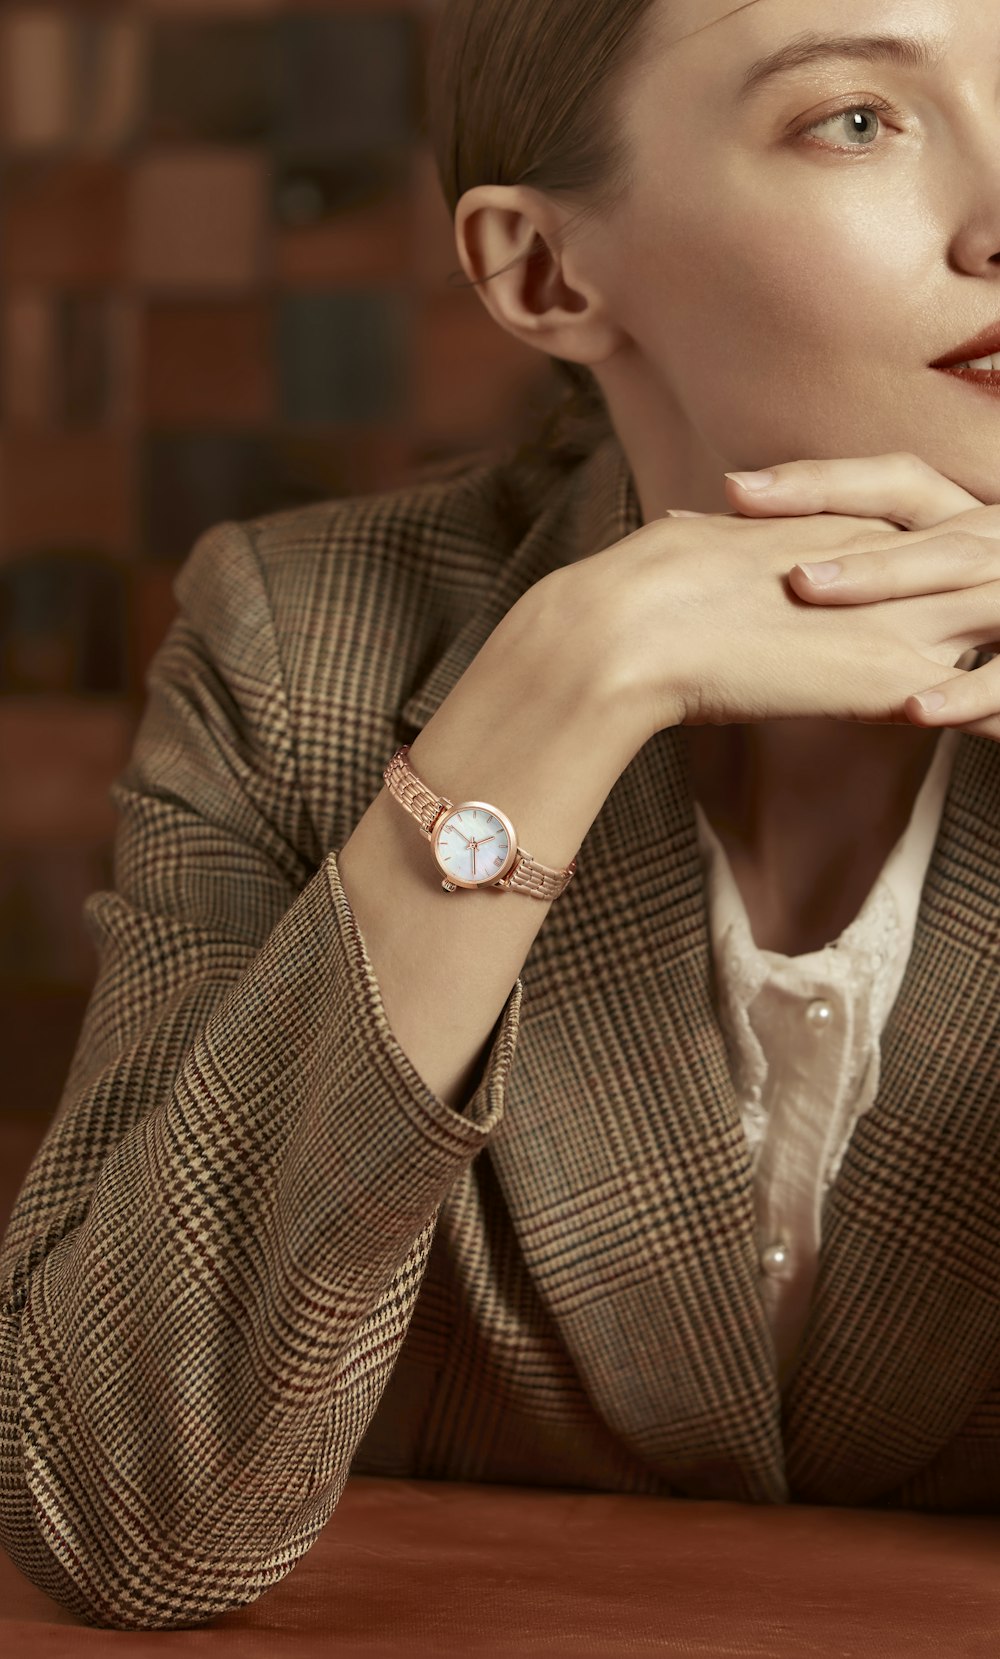 a woman sitting at a table with a watch on her wrist